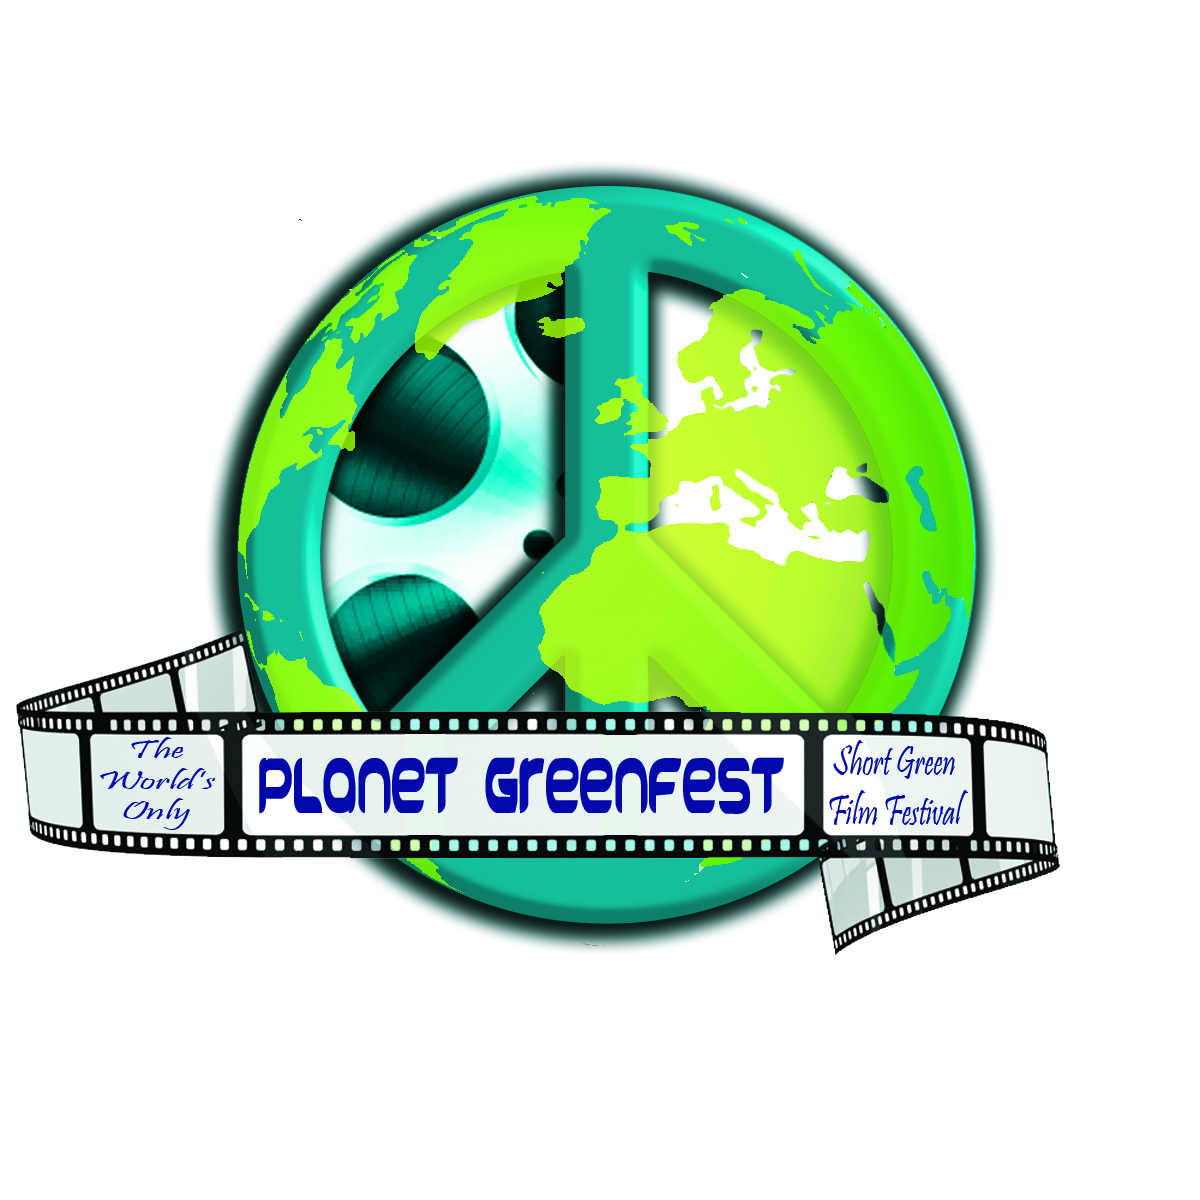 Planet Greenfest